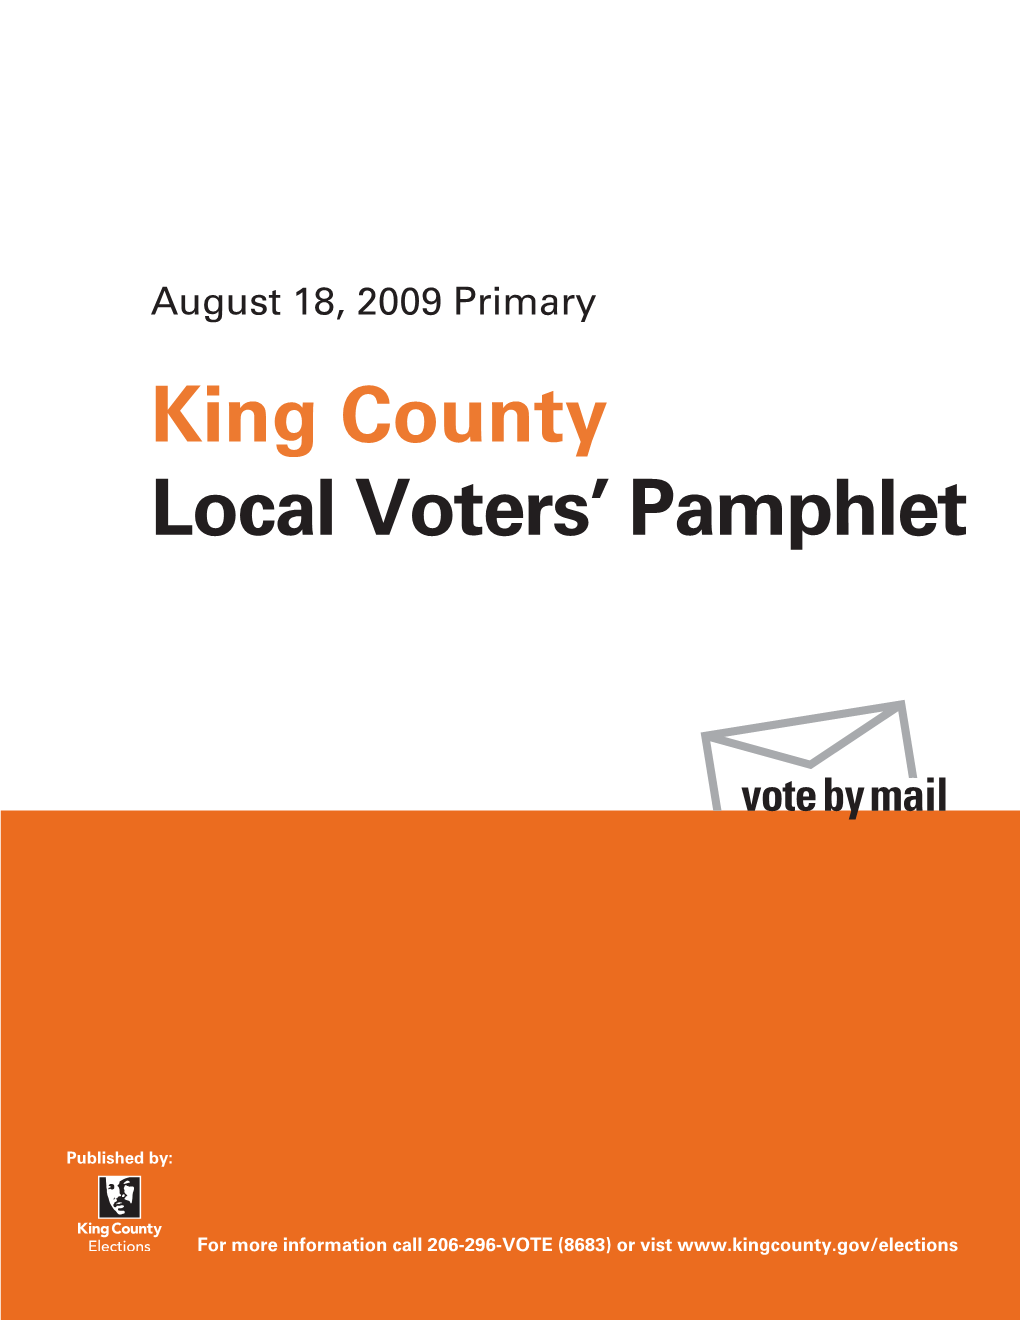 King County Local Voters' Pamphlet